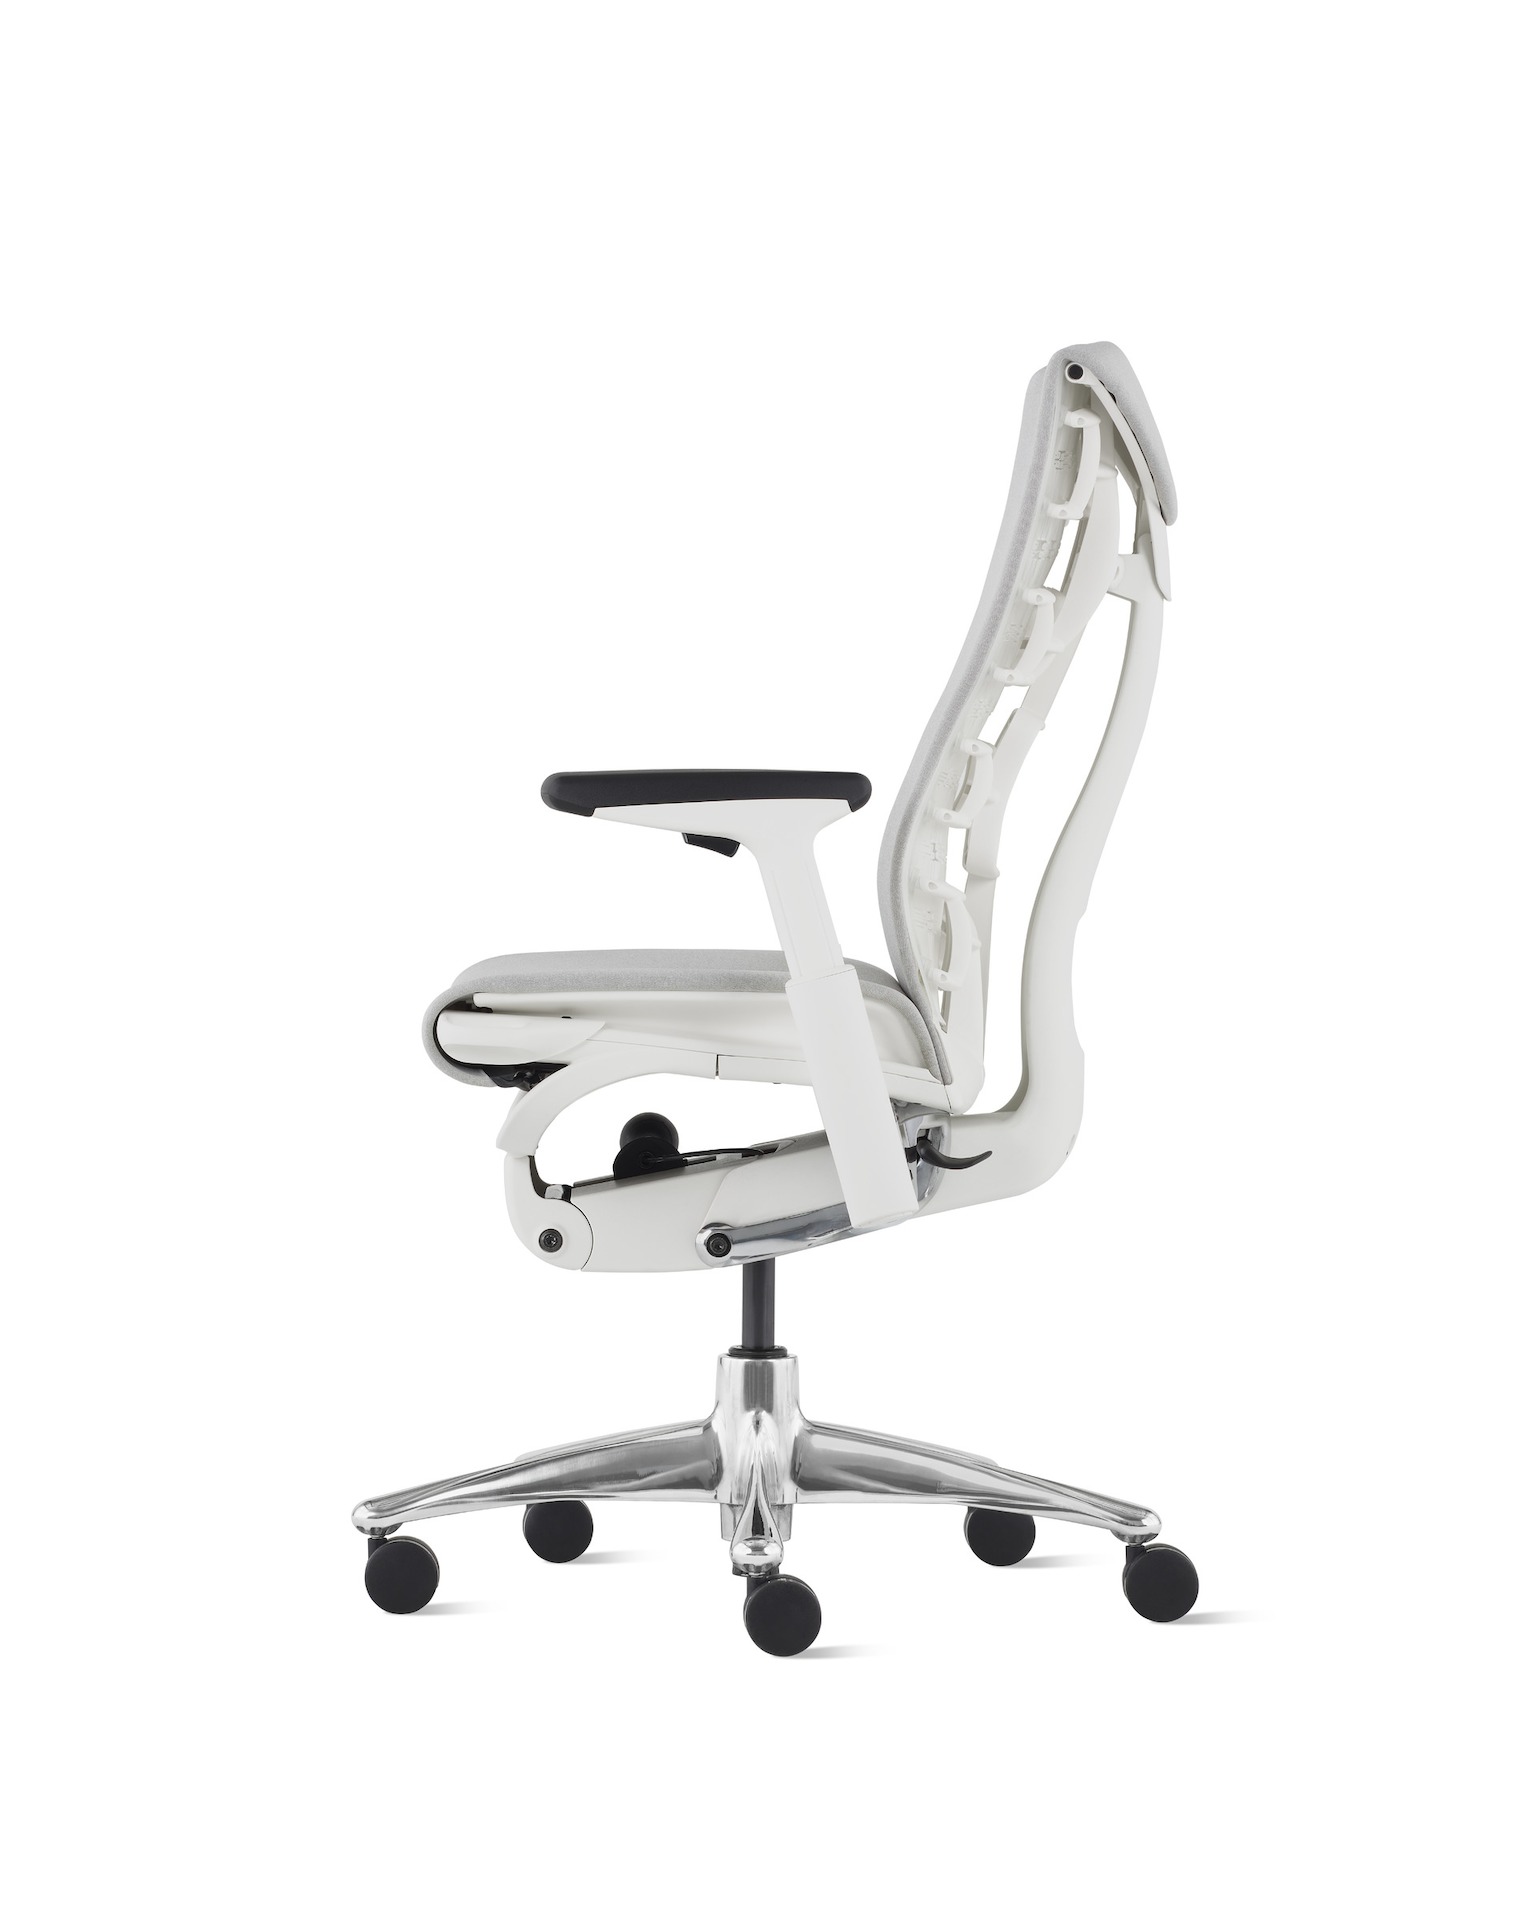 An Embody Chair, light grey color, side view.